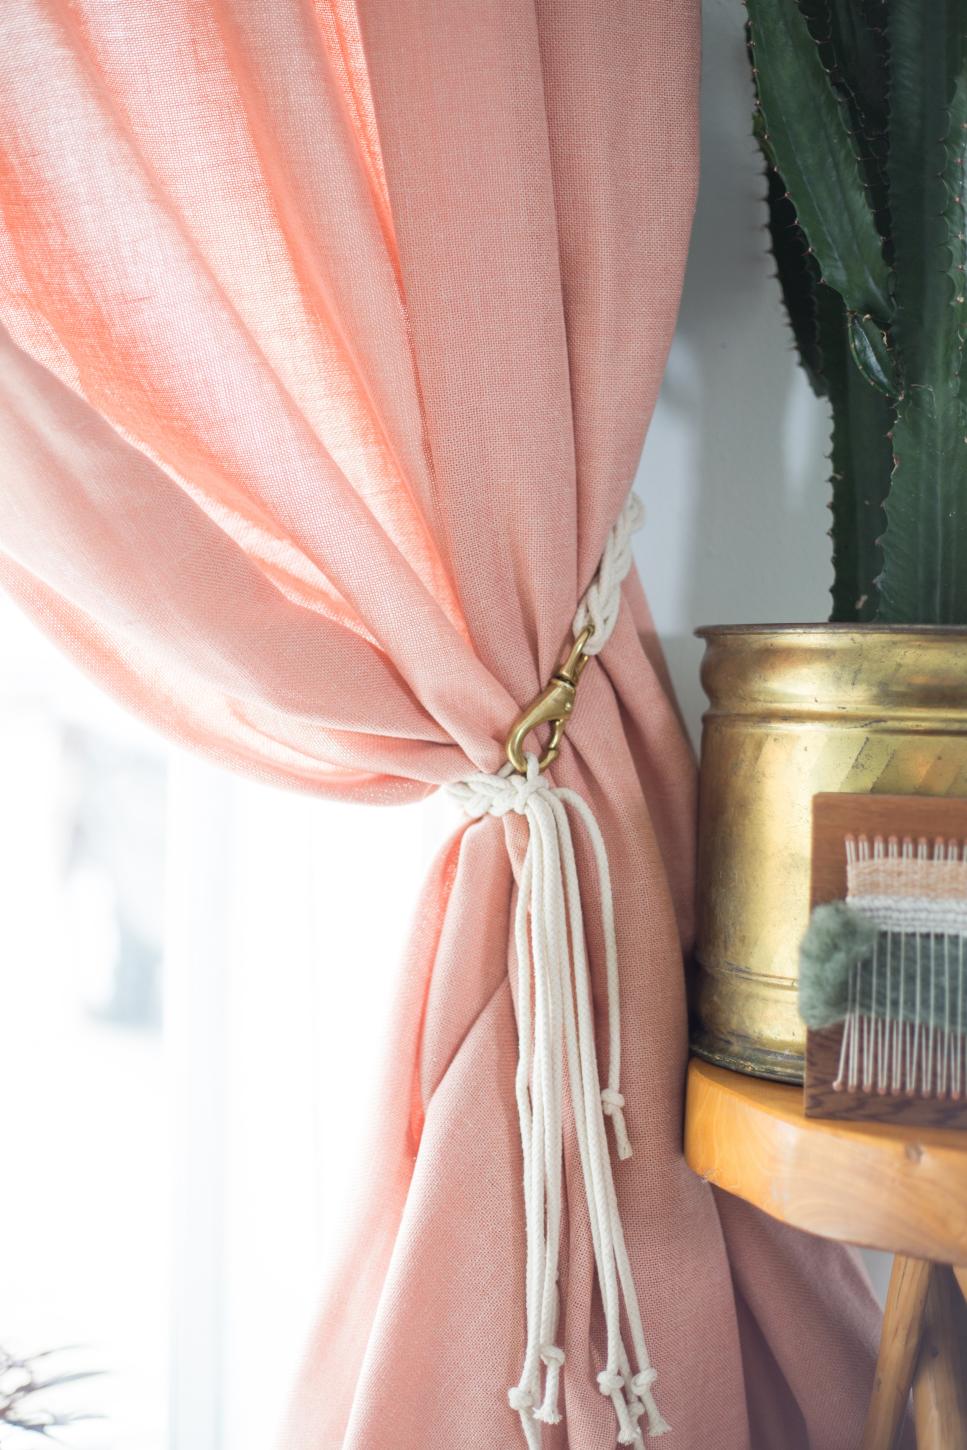 10 Diy Curtain Tieback Ideas That Don T Look Cheap Diy,How To Add Backsplash To Your Kitchen